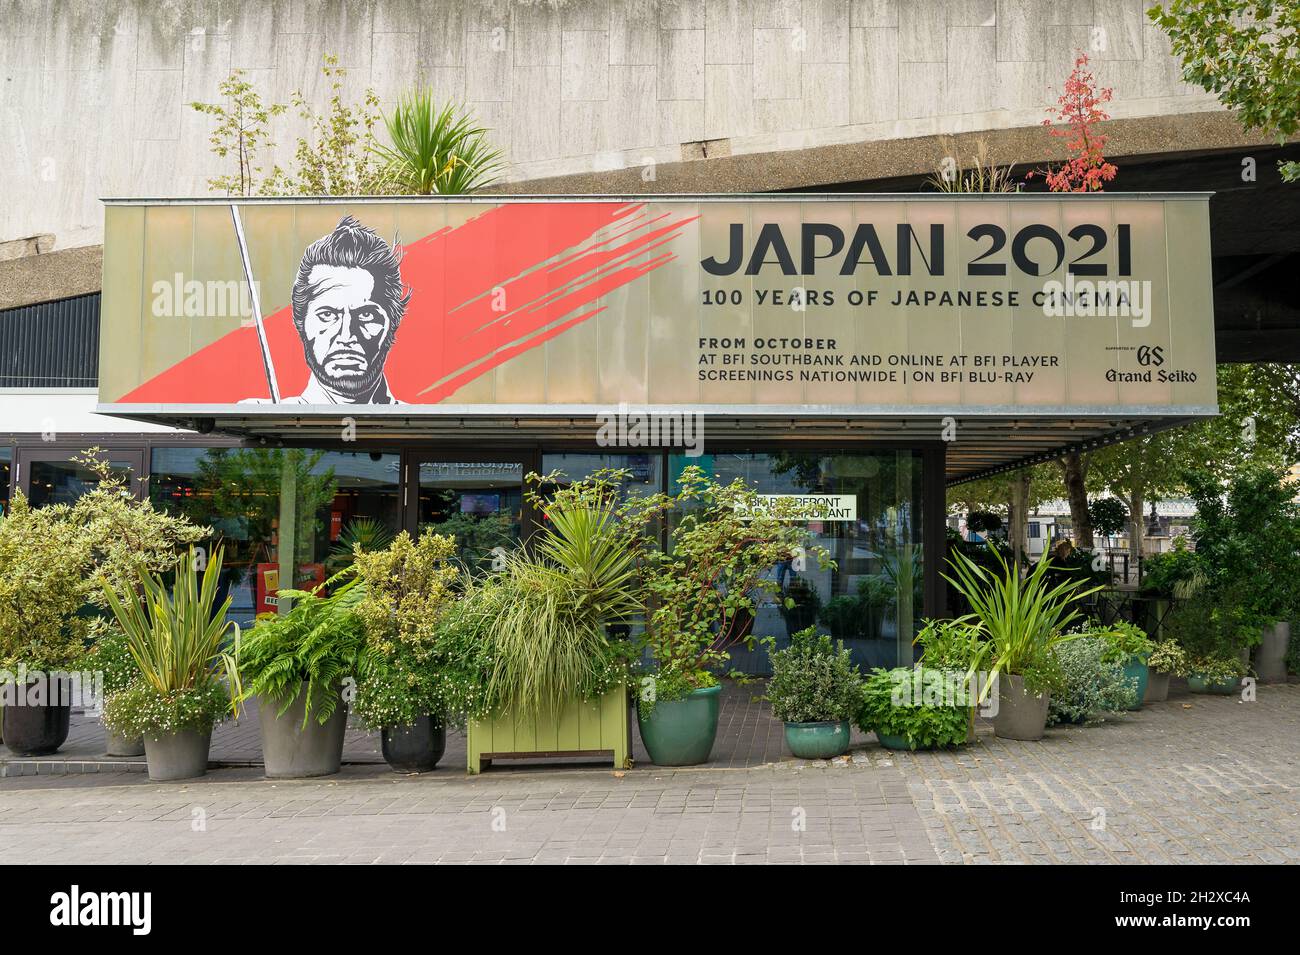 BFI Japan 2021: 100 Years of Japanese Cinema advertising at the BFI Southbank. London - 24th October 2021 Stock Photo